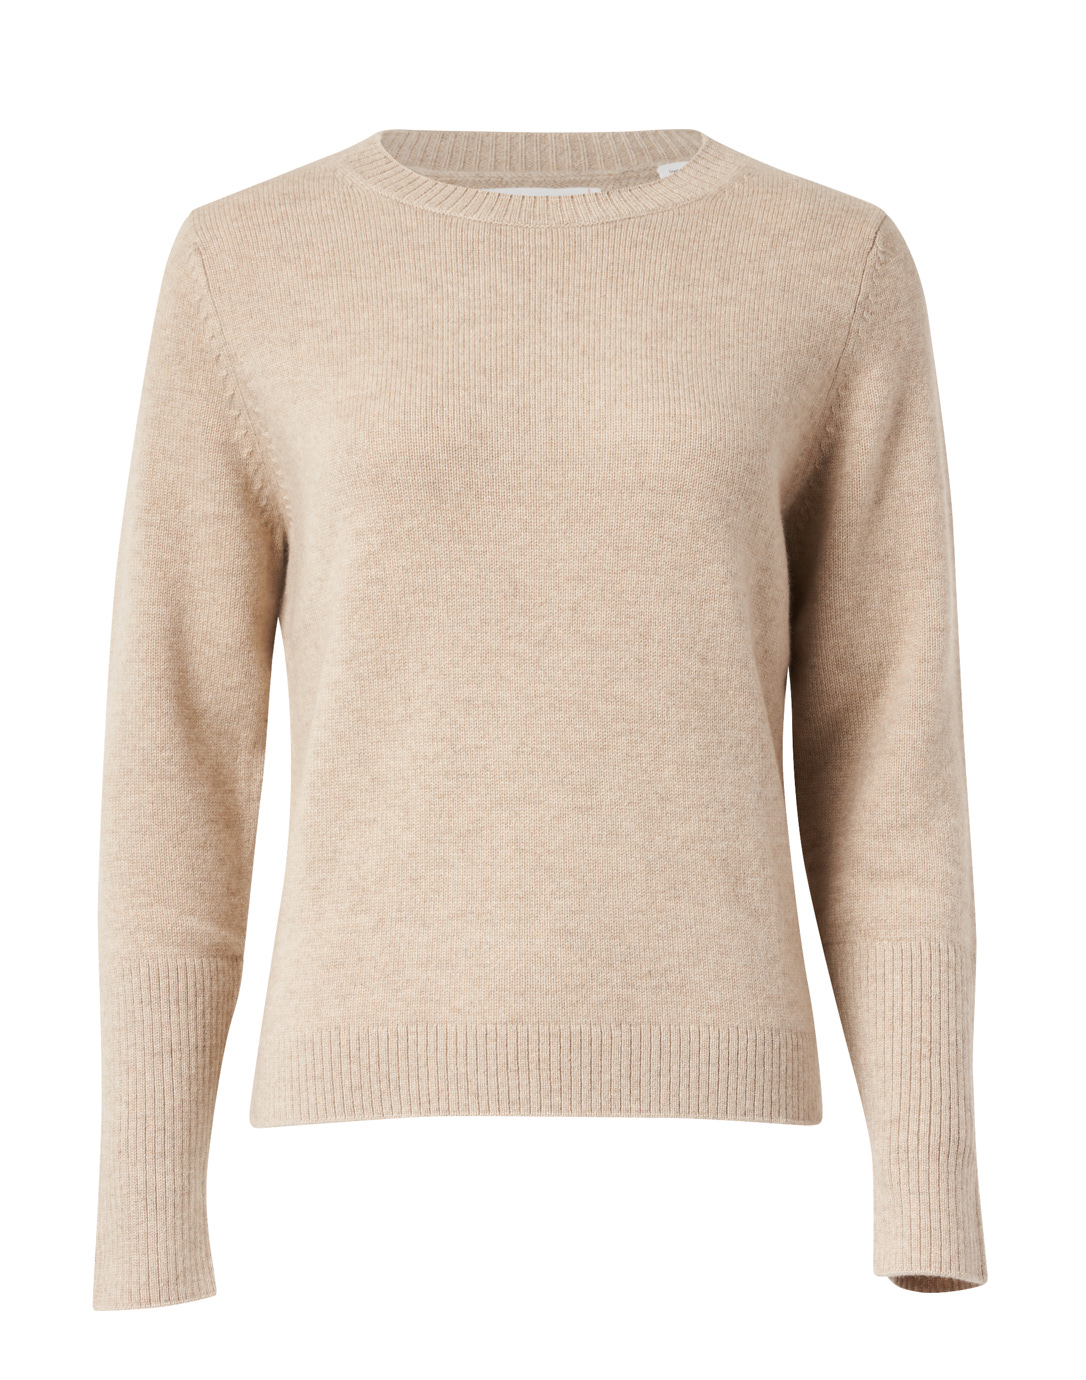 Essential Oatmeal Beige Cashmere Sweater | Chinti and Parker